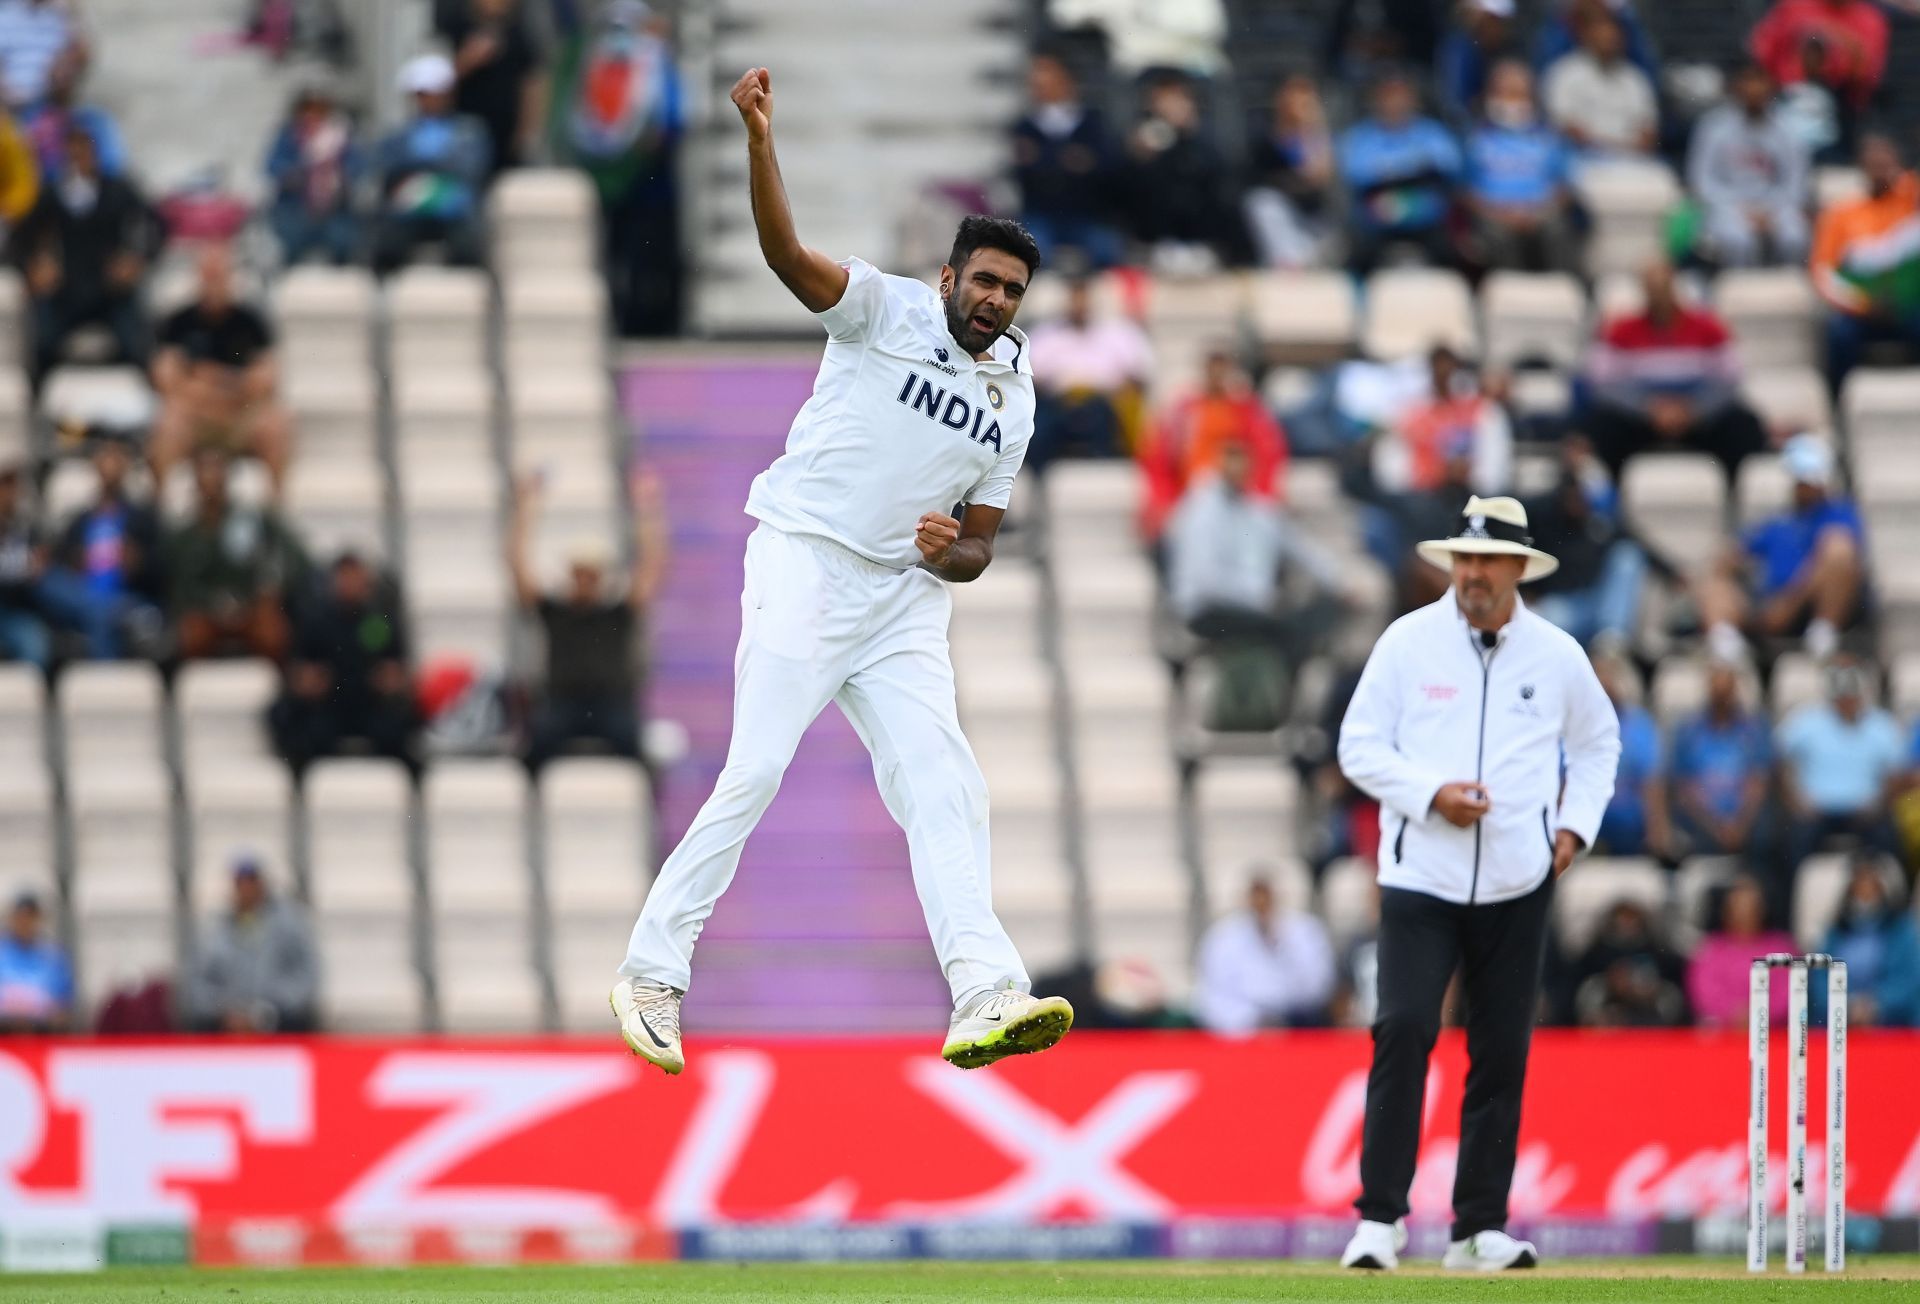 Ravichandran Ashwin became the third Indian bowler to pick up 700 international wickets.